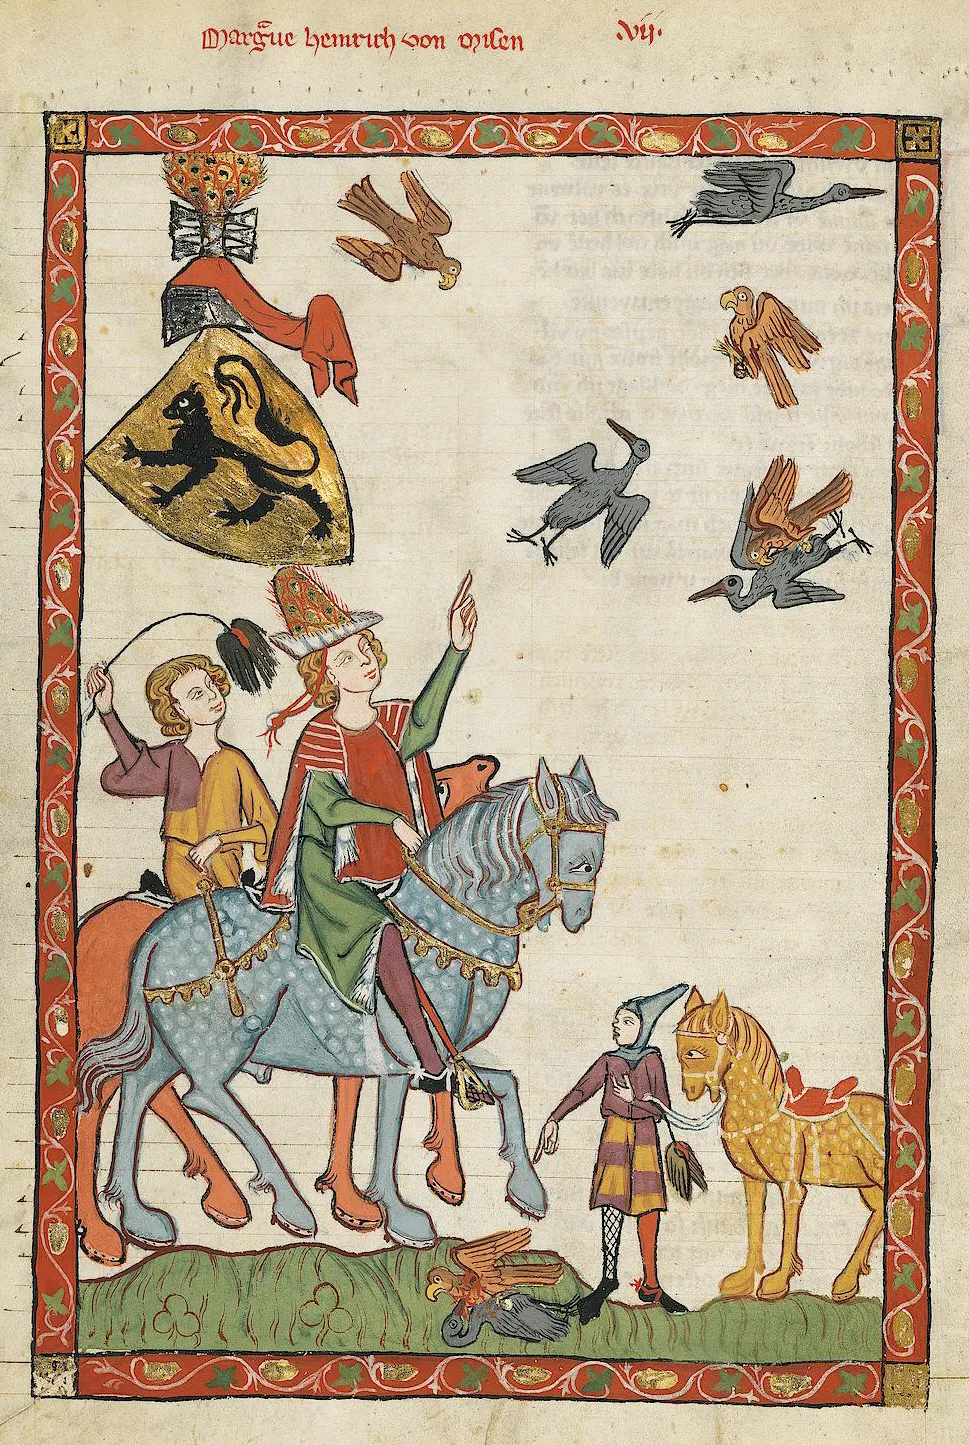 Medieval Europeans engaging in falconry on horseback